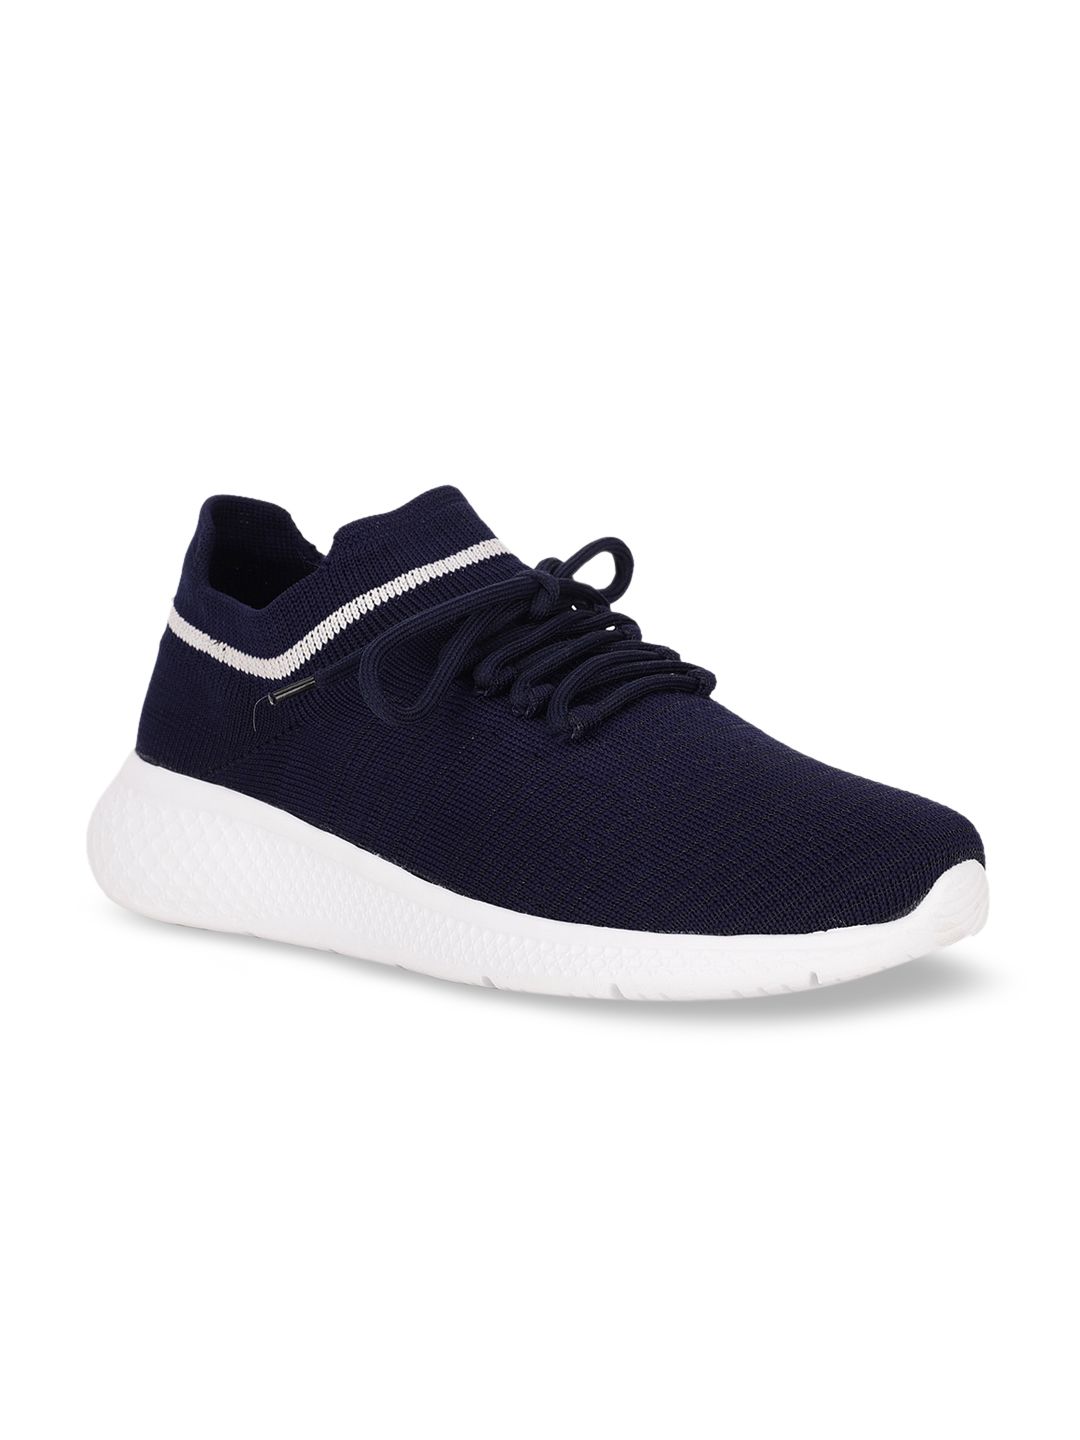 Bruno Manetti Women Navy Blue Woven Design Sneakers Price in India